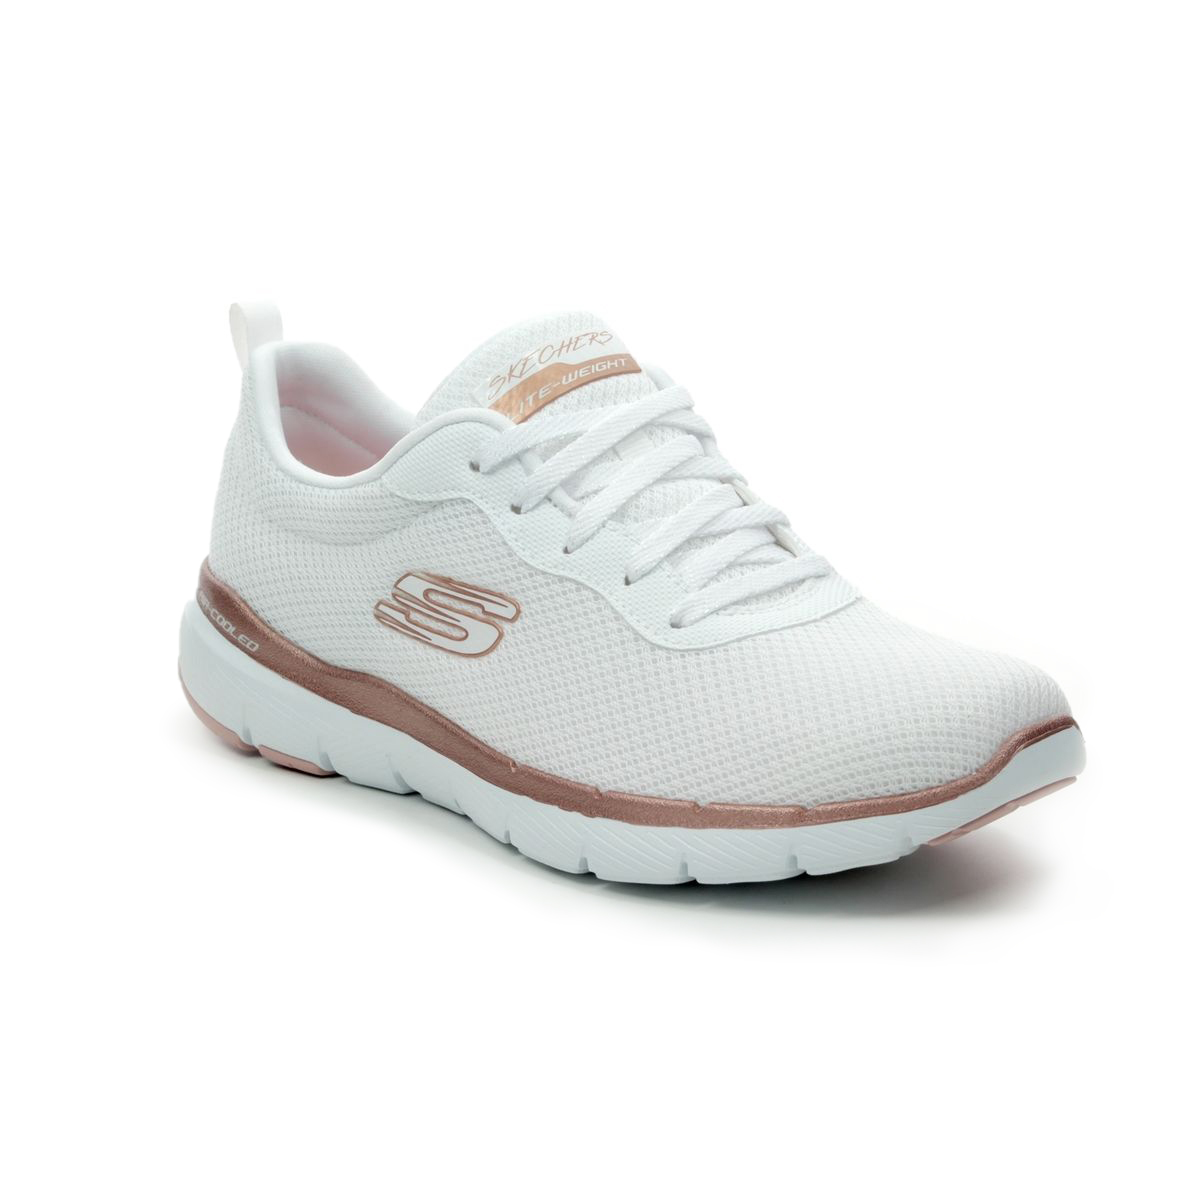 Skechers First Insight White Rose Gold Womens Trainers 13070 In Size 9 In Plain White Rose Gold